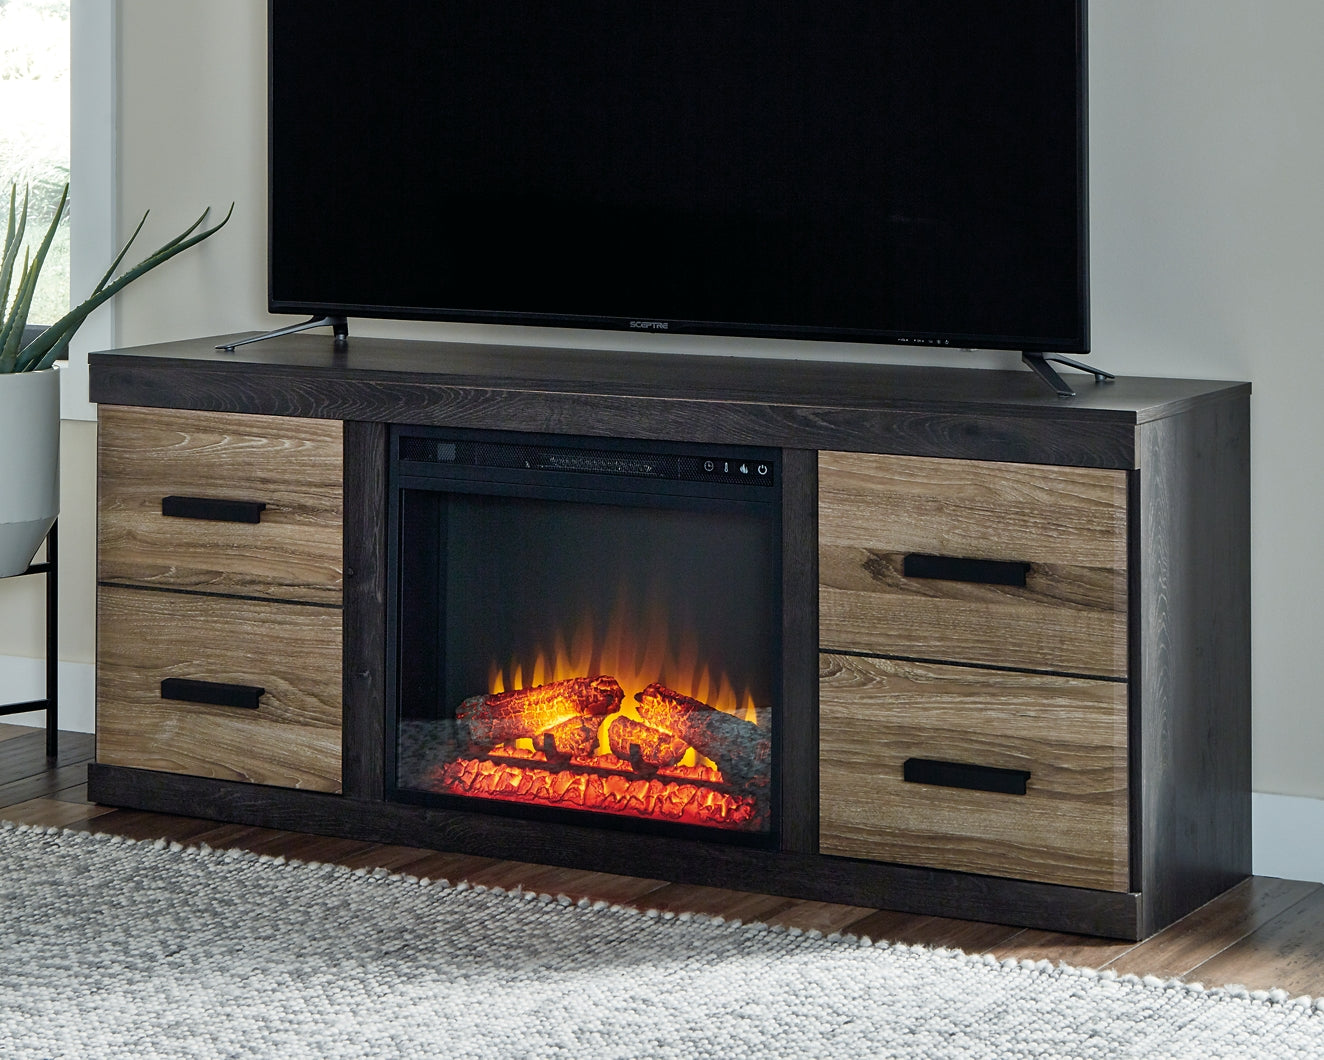 Harlinton 63" TV Stand with Electric Fireplace